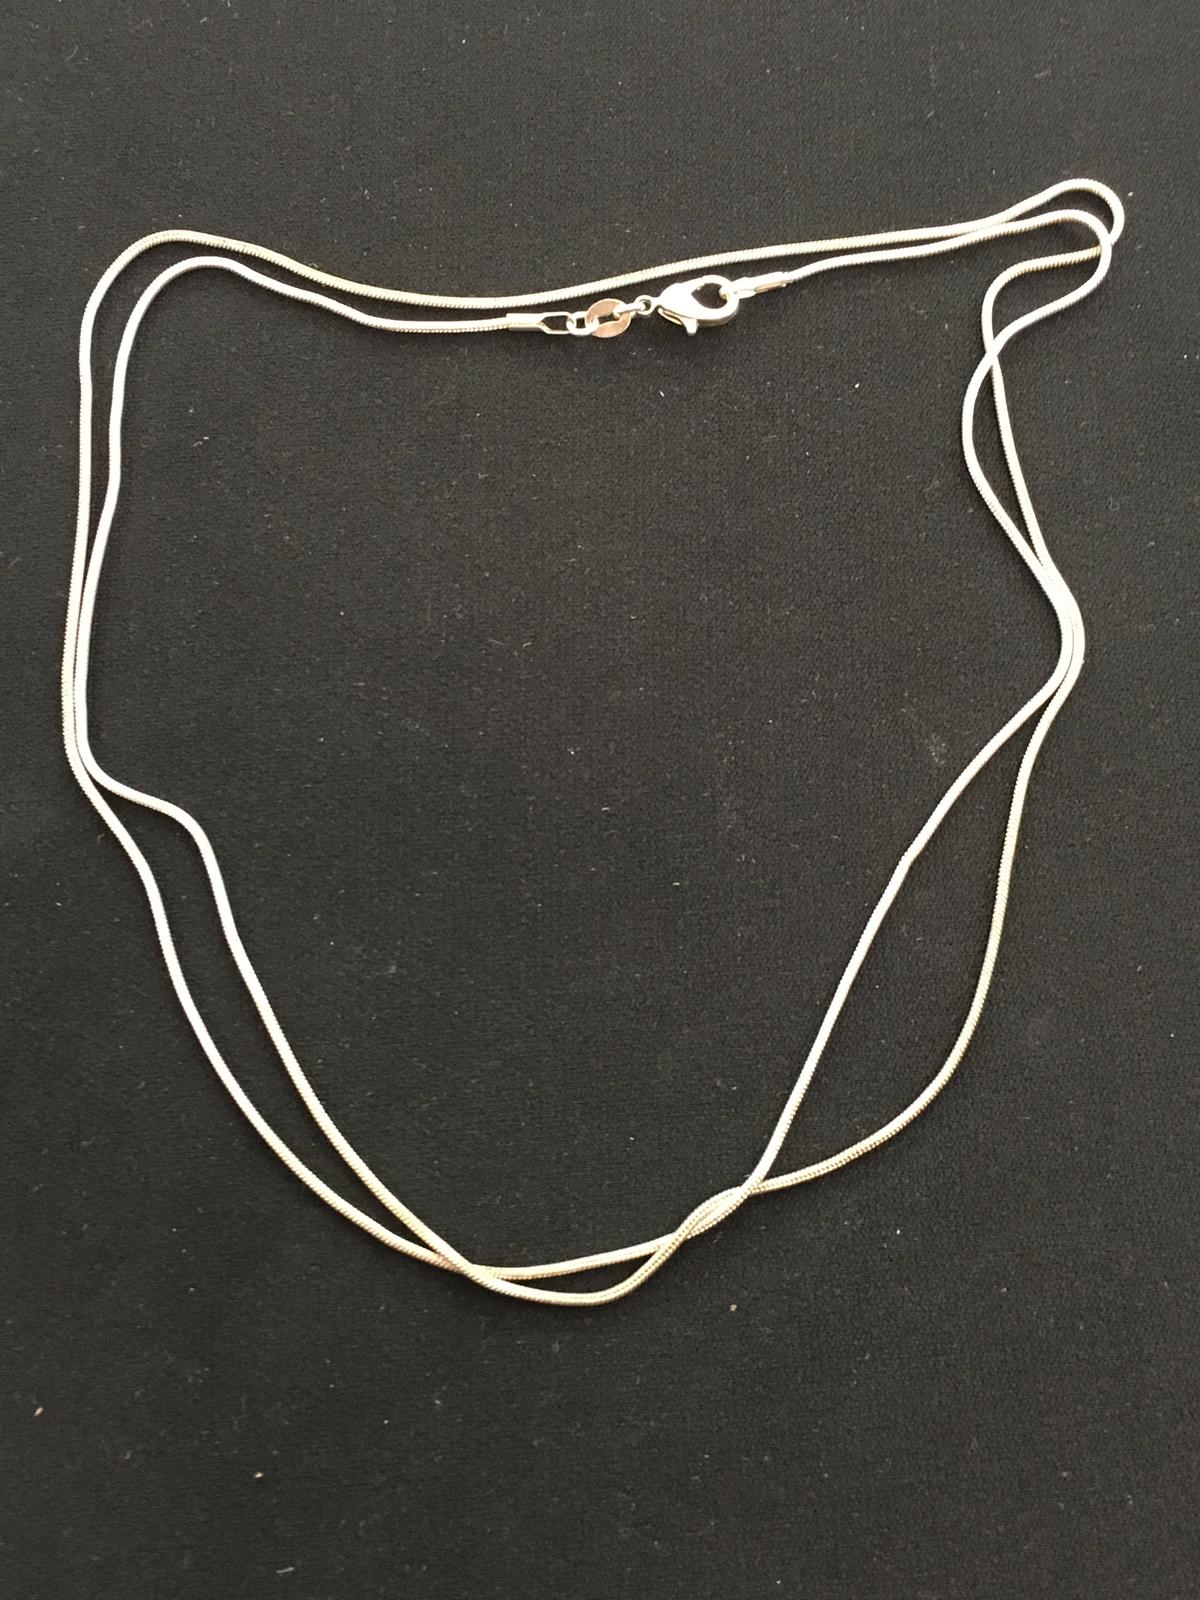 Long 32" Sterling Silver Snake Chain w/ Lobster Claw Clasp